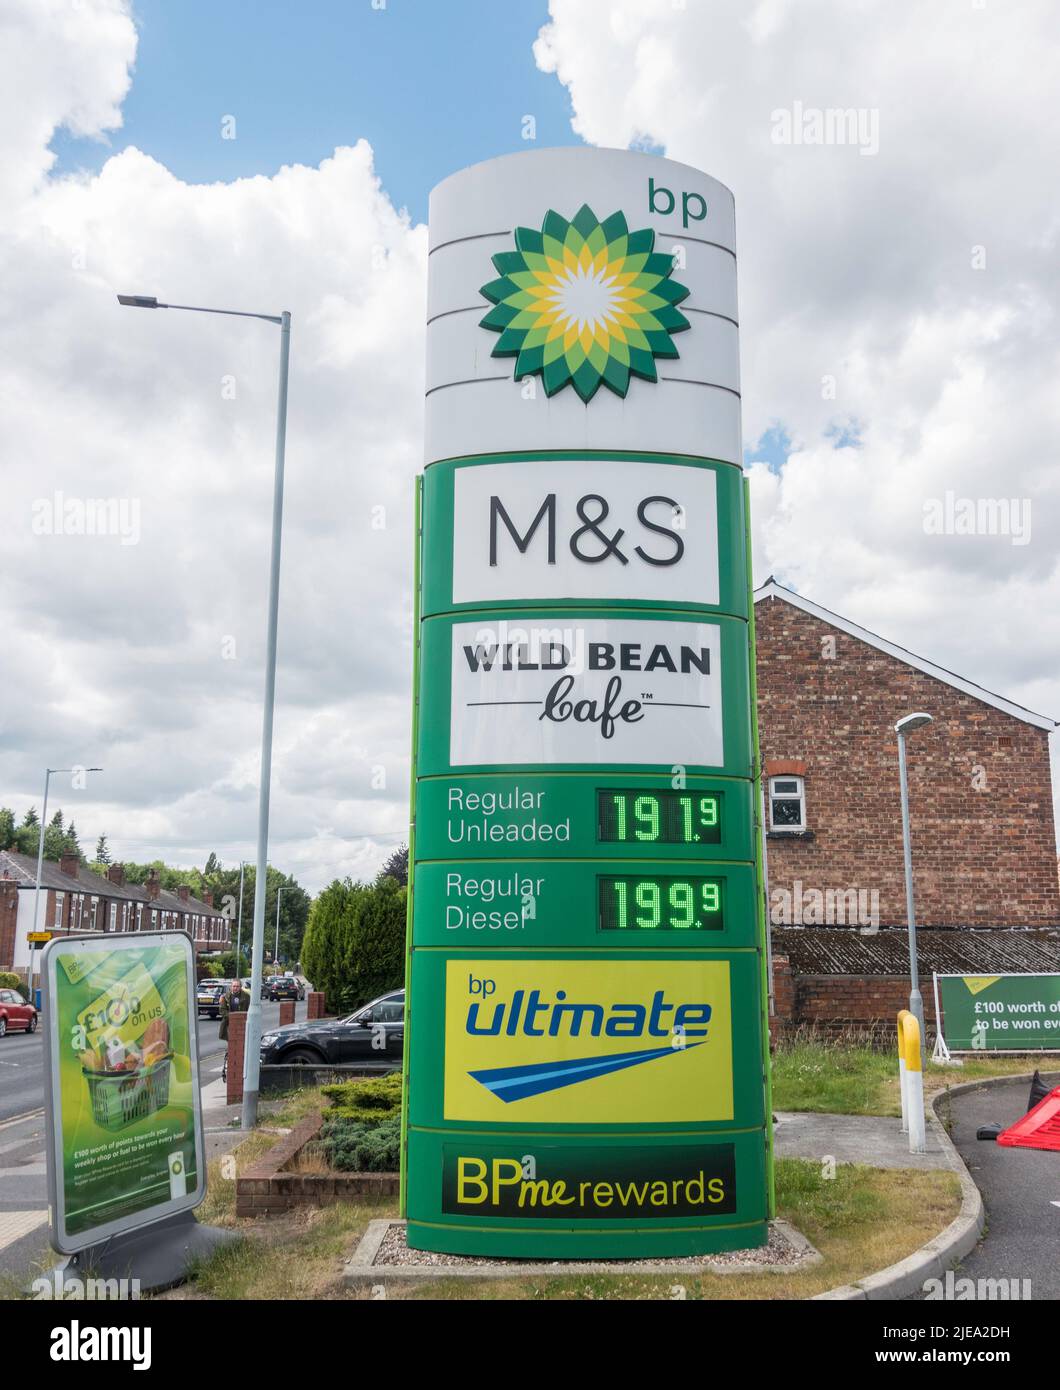 Heaton Mersey, Manchester, UK 25-6-2022 Diesel costing 199.9 p,  just less than £2 per litre, at this BP filling station. Stock Photo